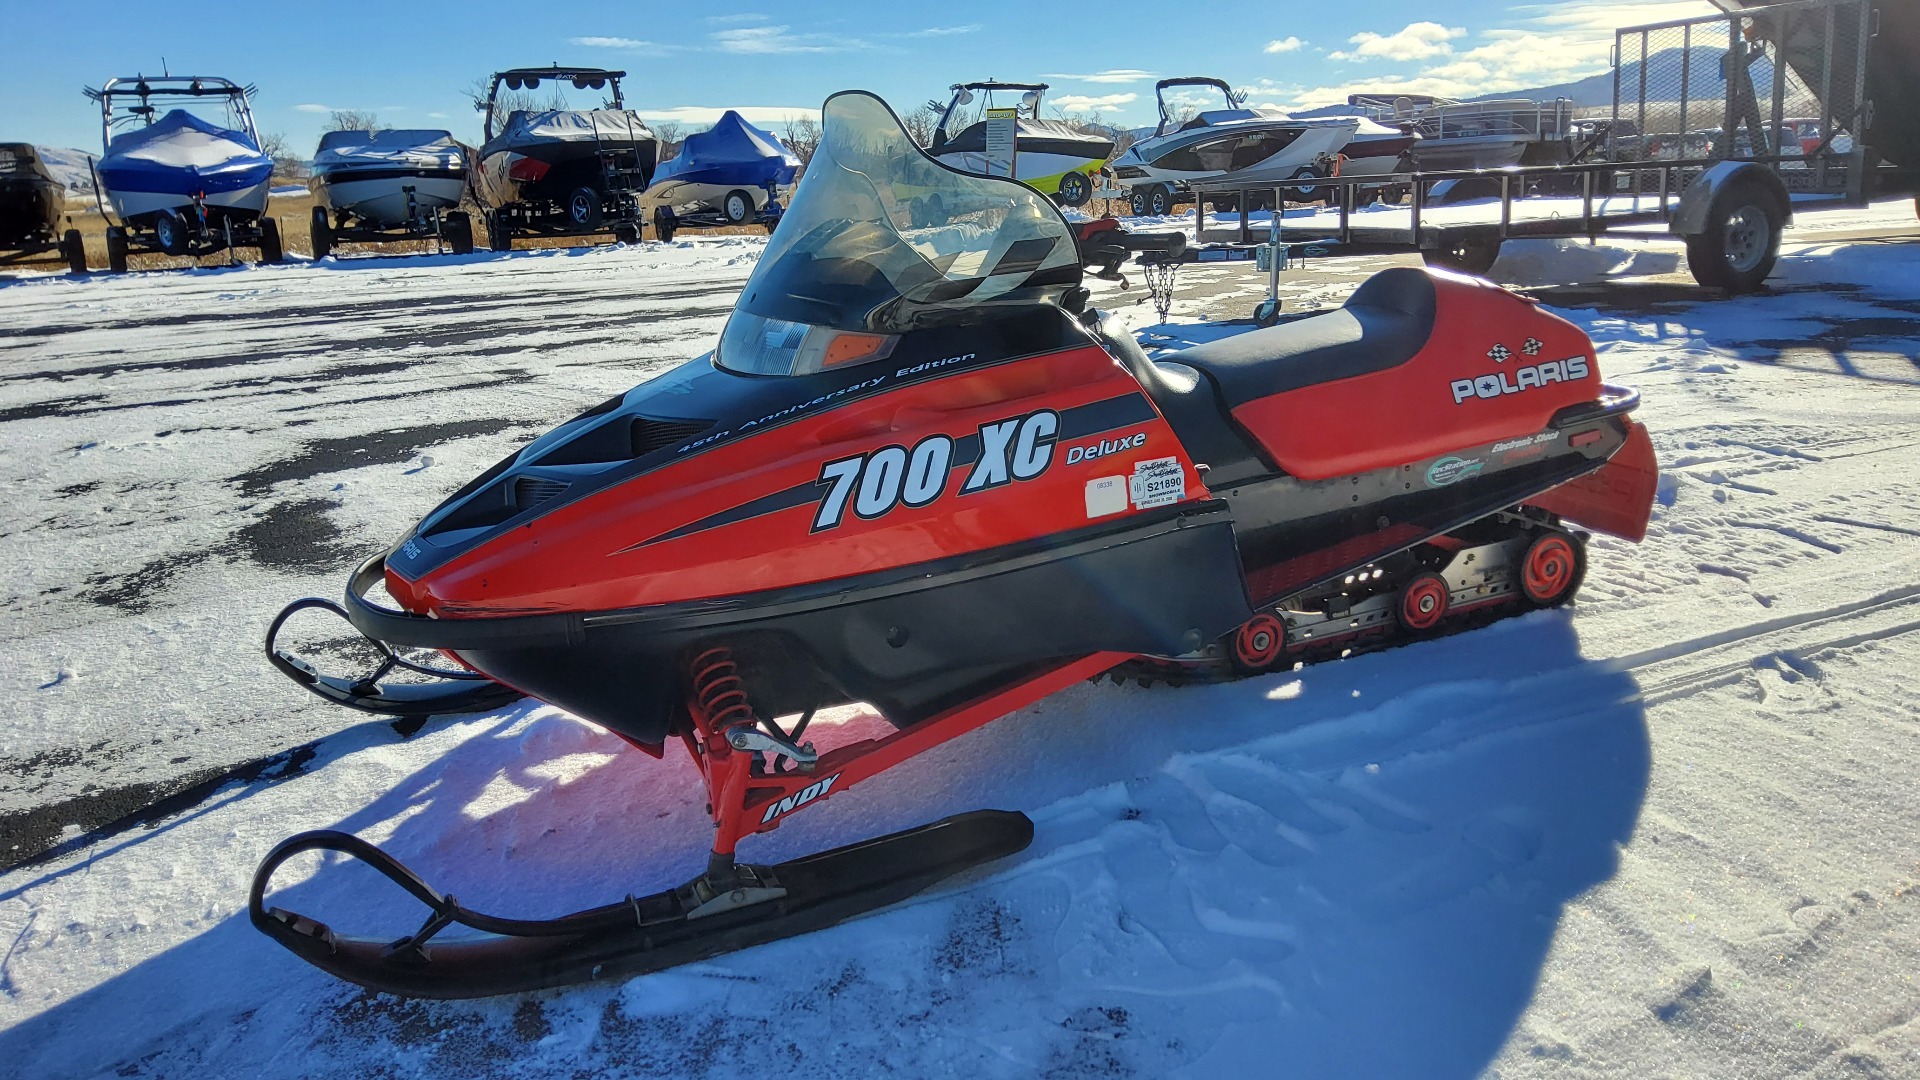 2000 Polaris Indy 700 XC Deluxe 45th Anniversary Edition in Spearfish, South Dakota - Photo 3